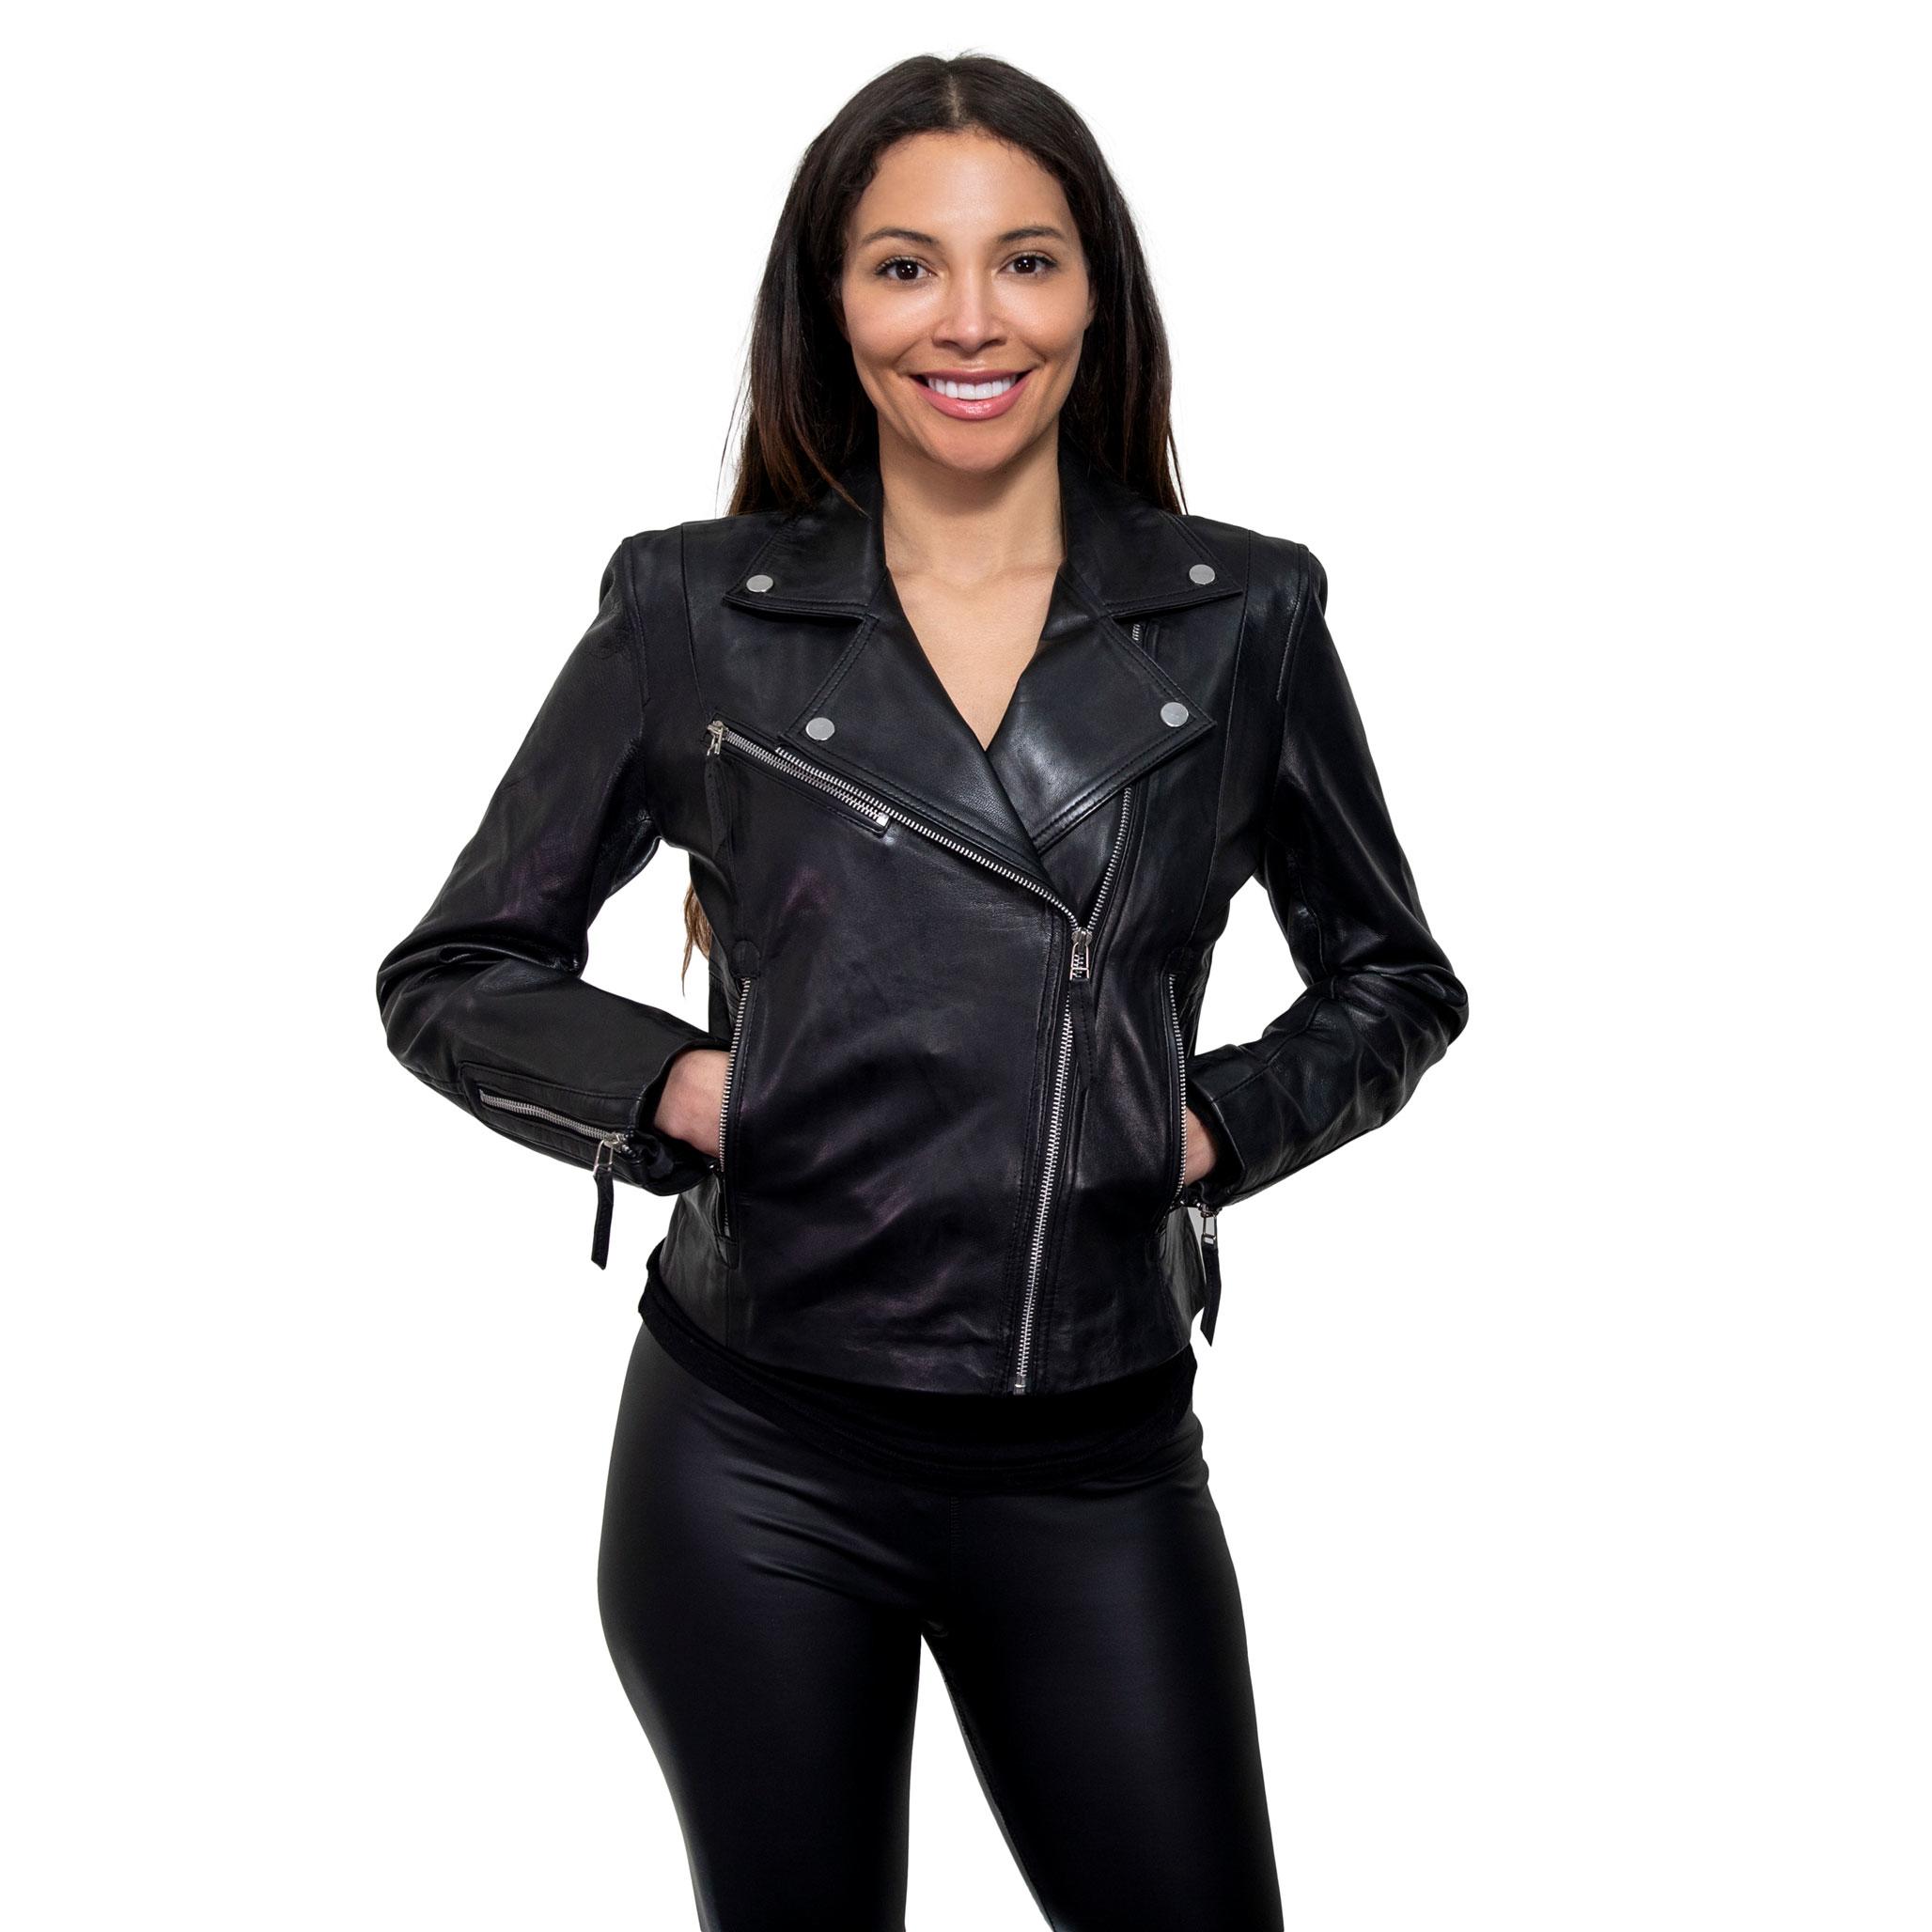 A model smiling with her hands in her pockets, wearing a wonderful womens black biker jacket, in a slim fit.